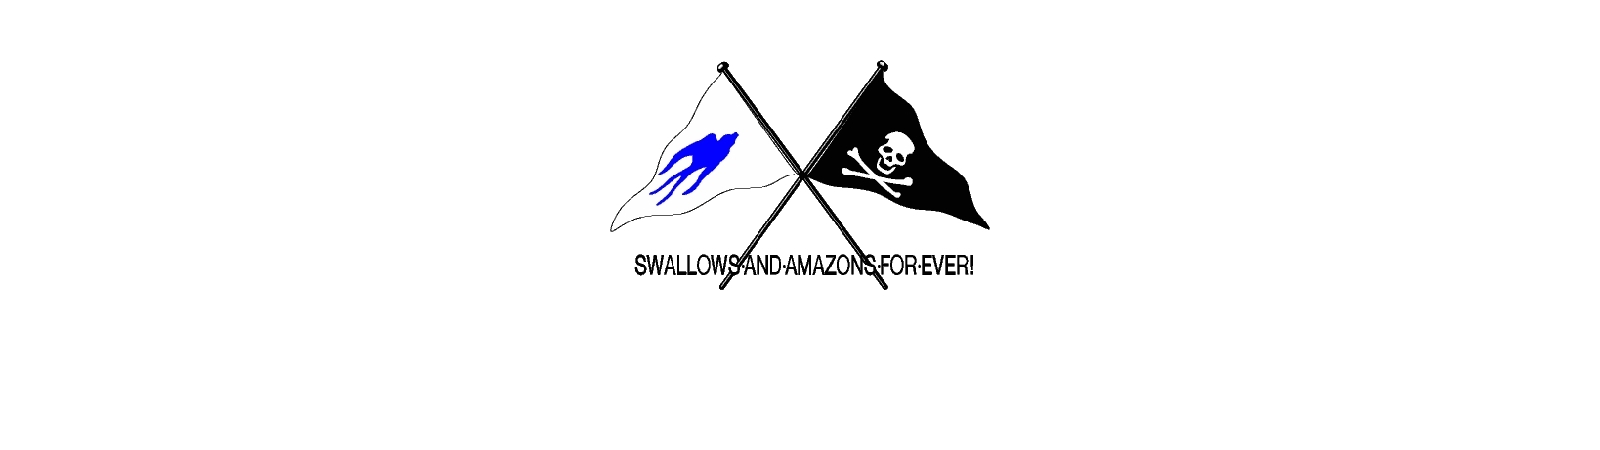 A Happy Christmas from Swallows and Amazons!